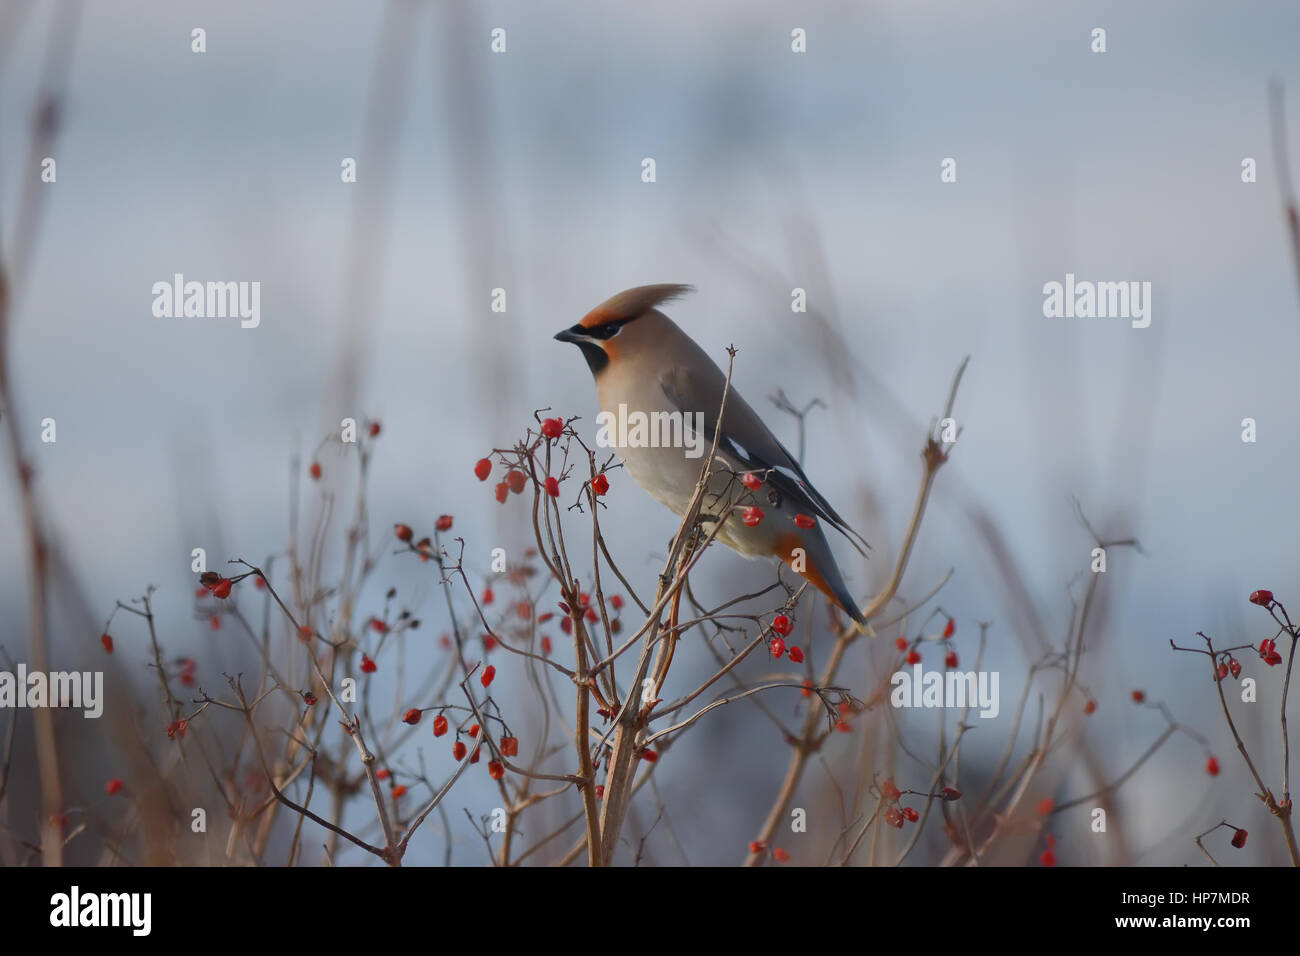 Waxwing perched Stock Photo